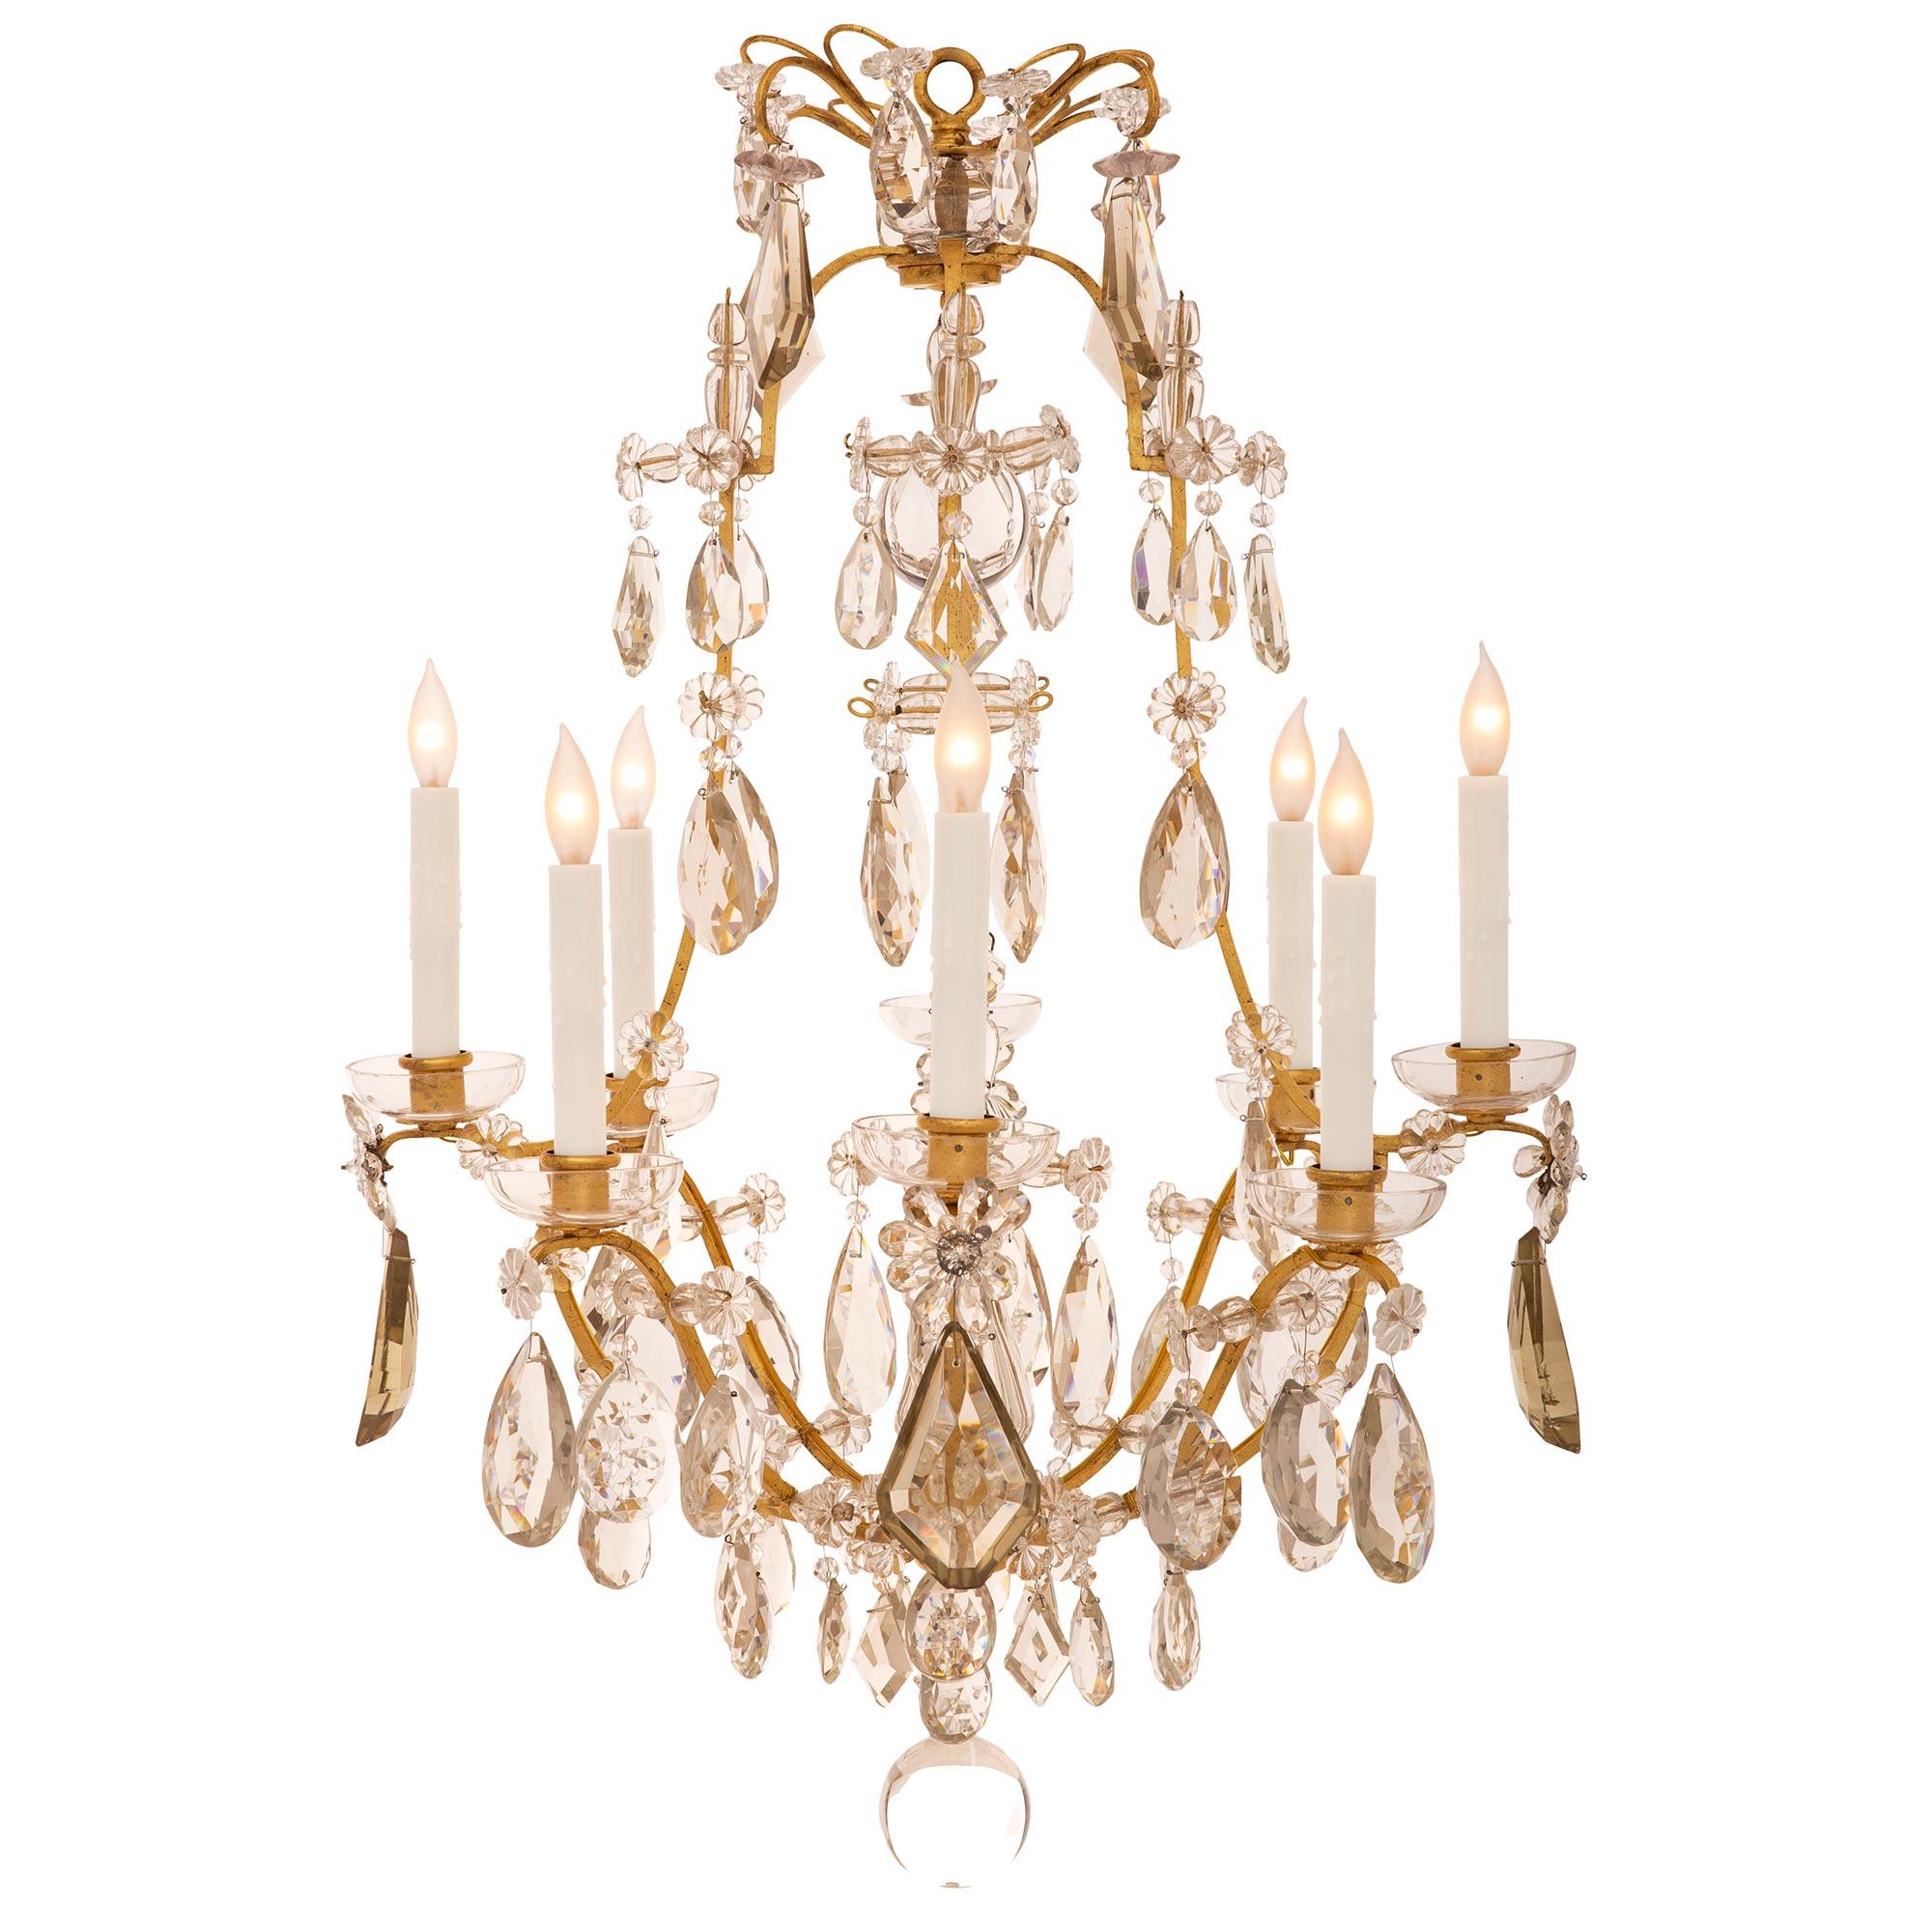 A beautiful French turn of the century Louis XV st. gilt metal and Baccarat crystal chandelier. The eight arm chandelier is centered by a solid Baccarat crystal ball pendant amidst an exceptional array of tear drop and kite shaped pendants. The